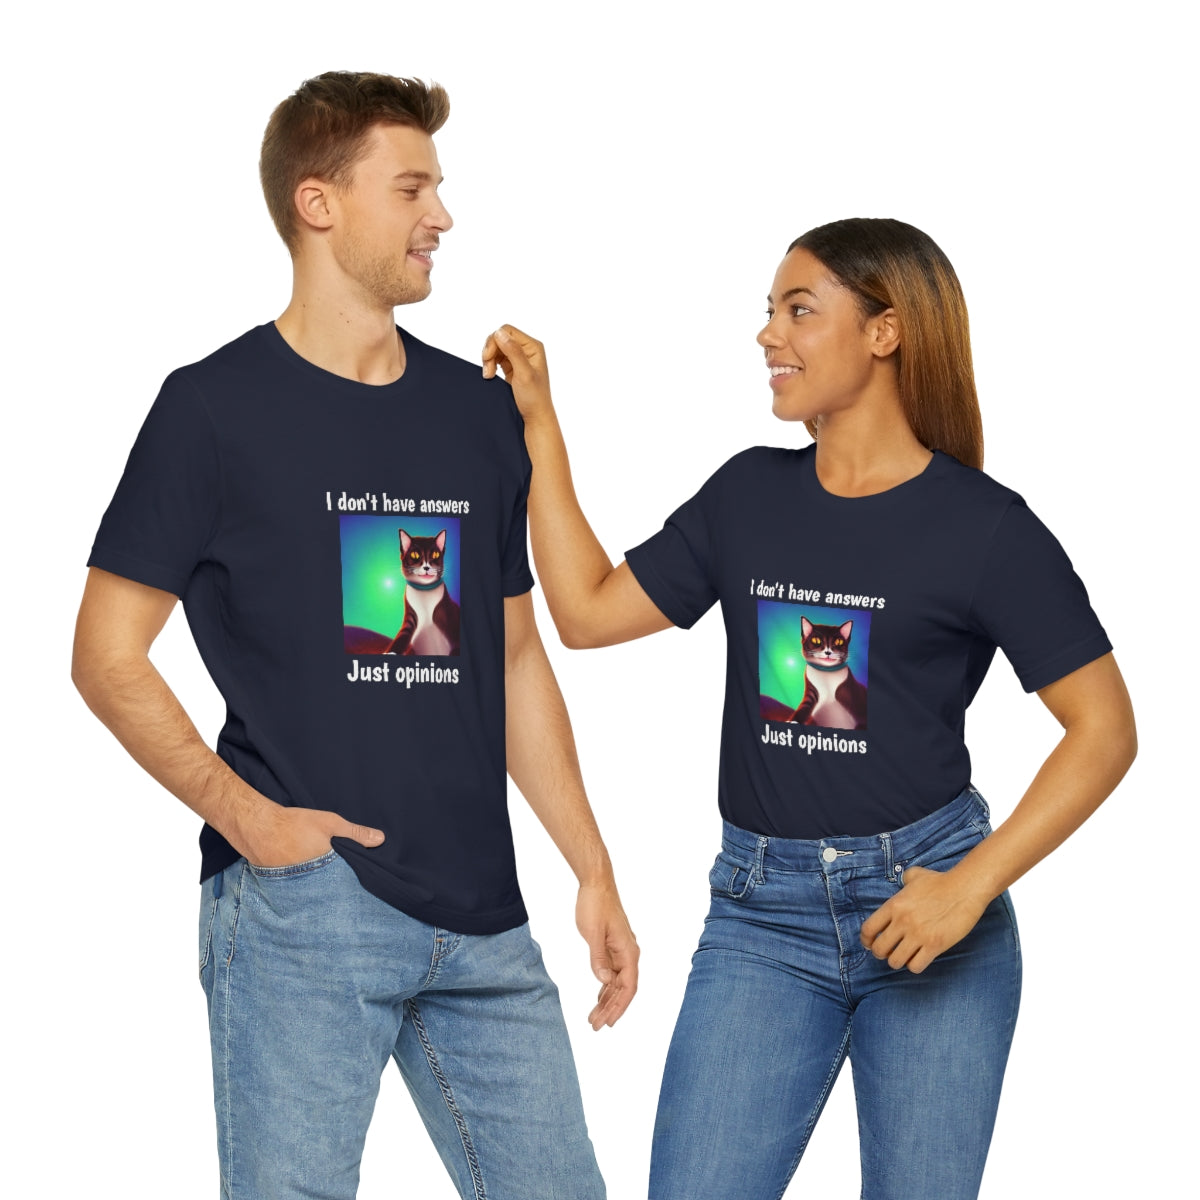 Funny - I don't have answers just opinions - Unisex Short Sleeve Tee